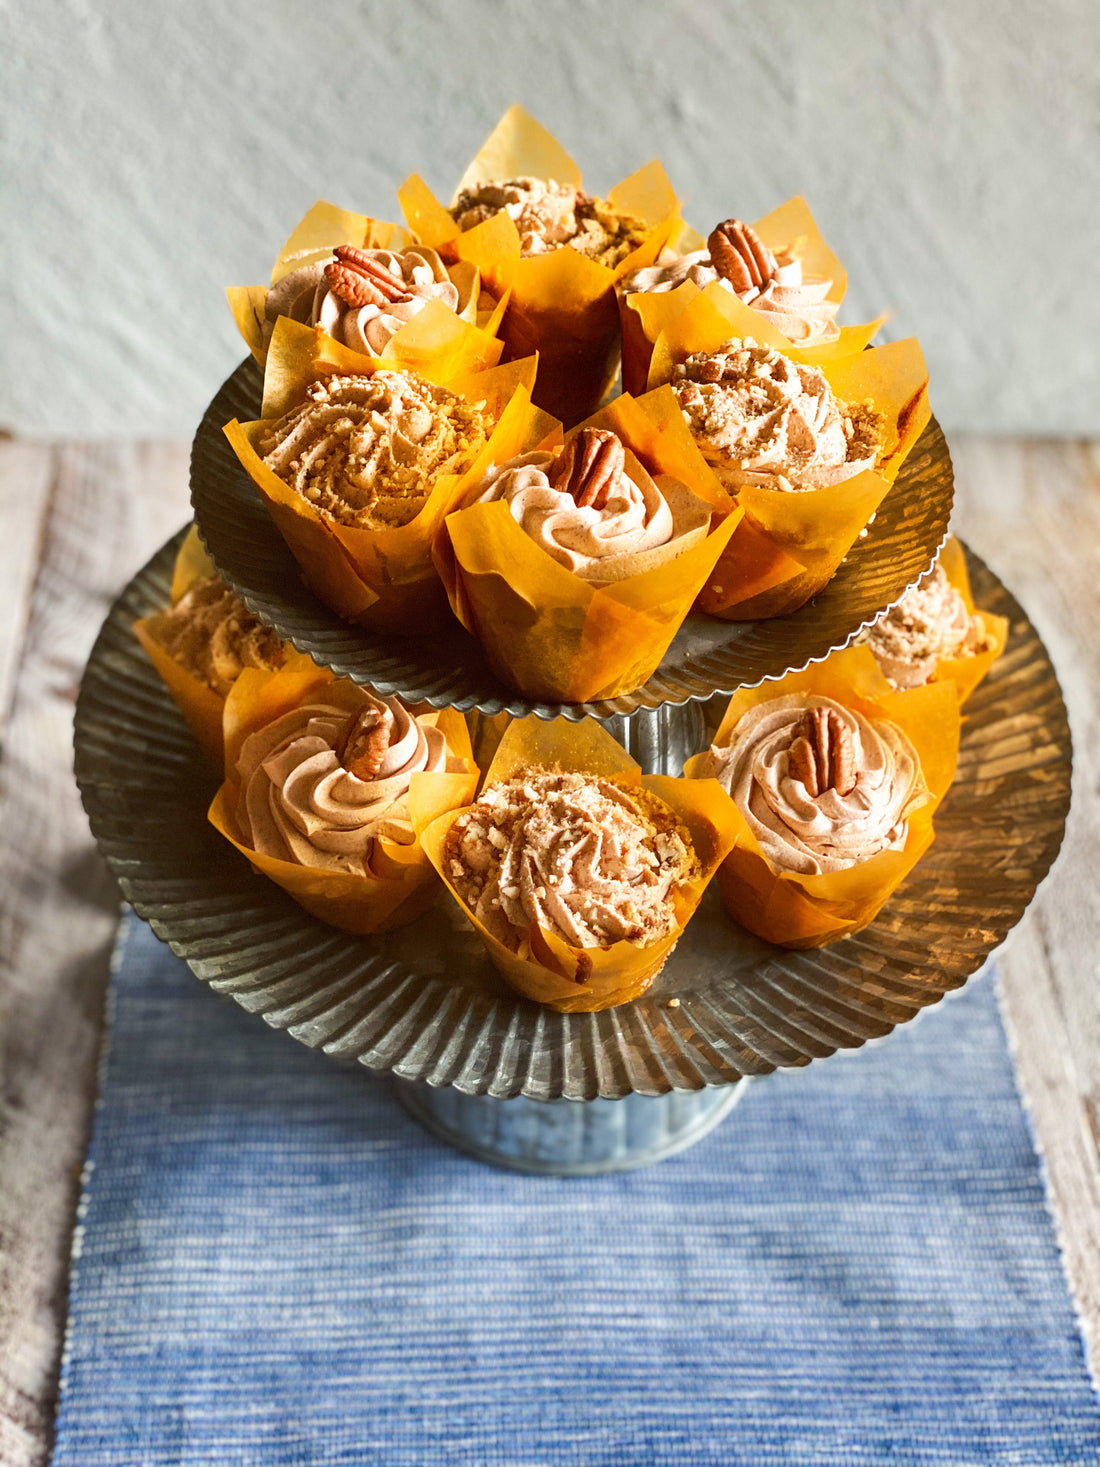 PECAN CUPCAKES WITH CINNAMON BUTTERCREAM FROSTING